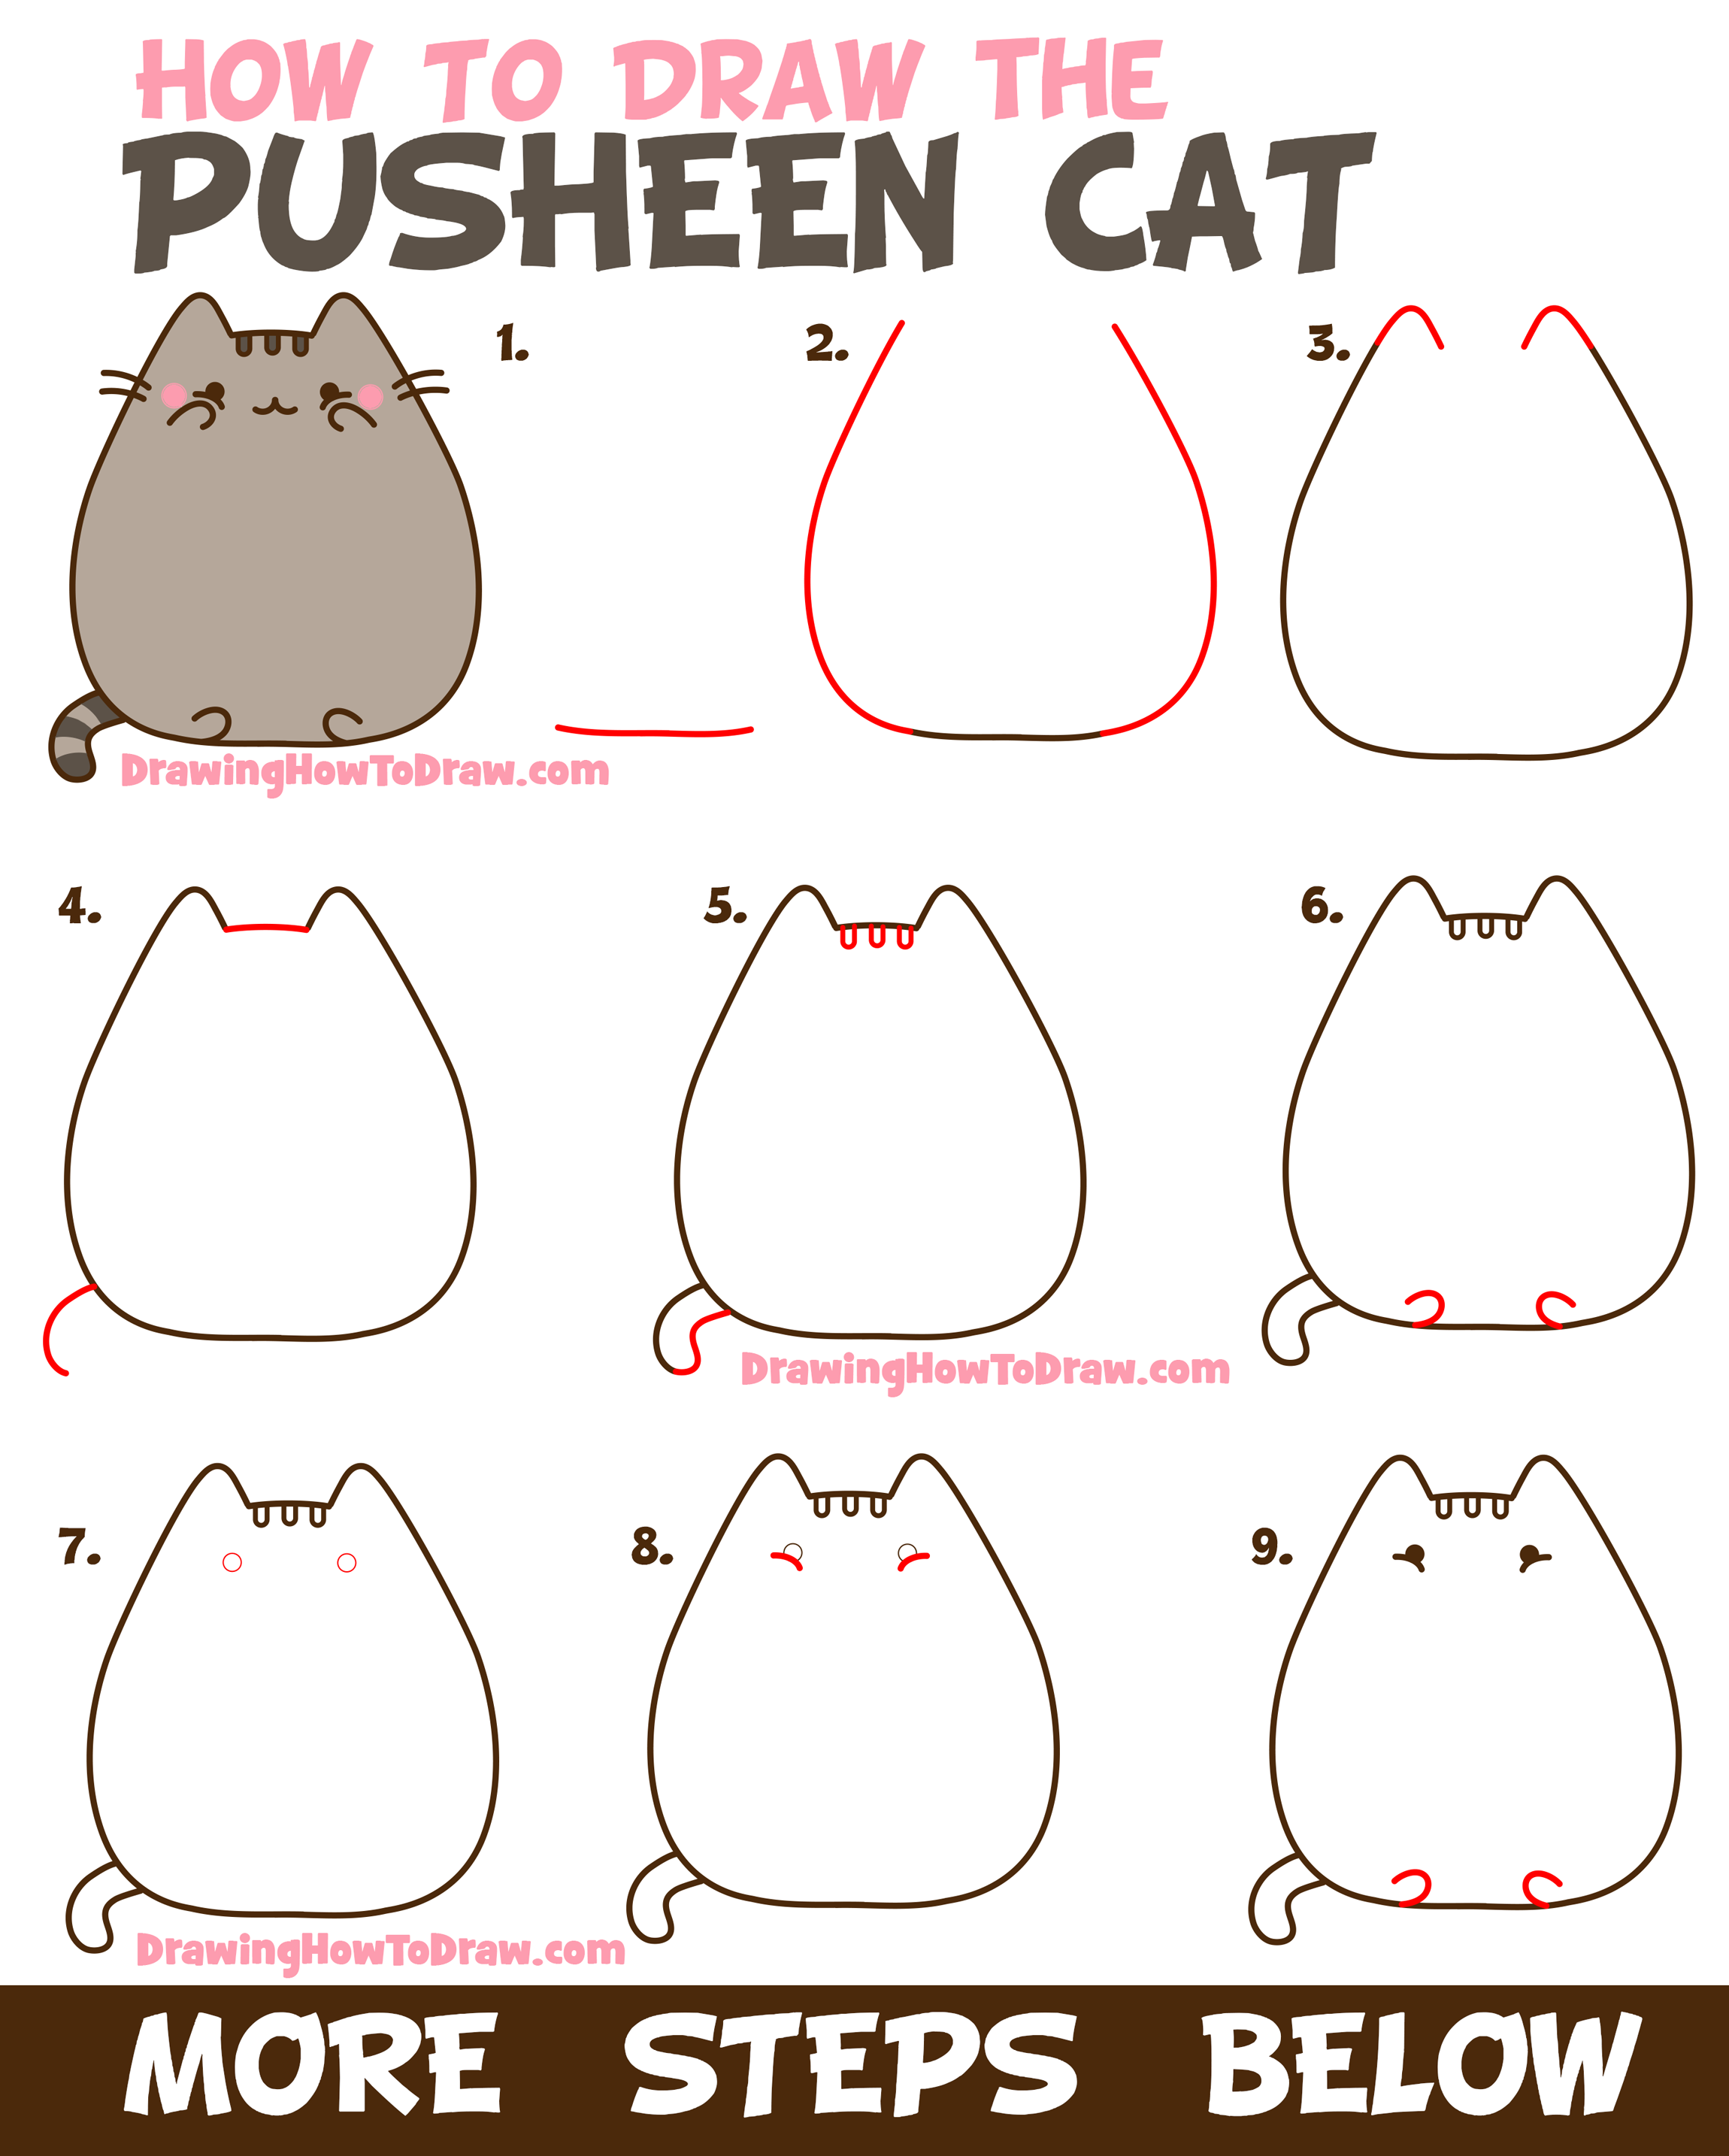 Learn How to Draw the Pusheen Cat from Facebook and Social Media with Easy Step by Step Drawing Tutorial